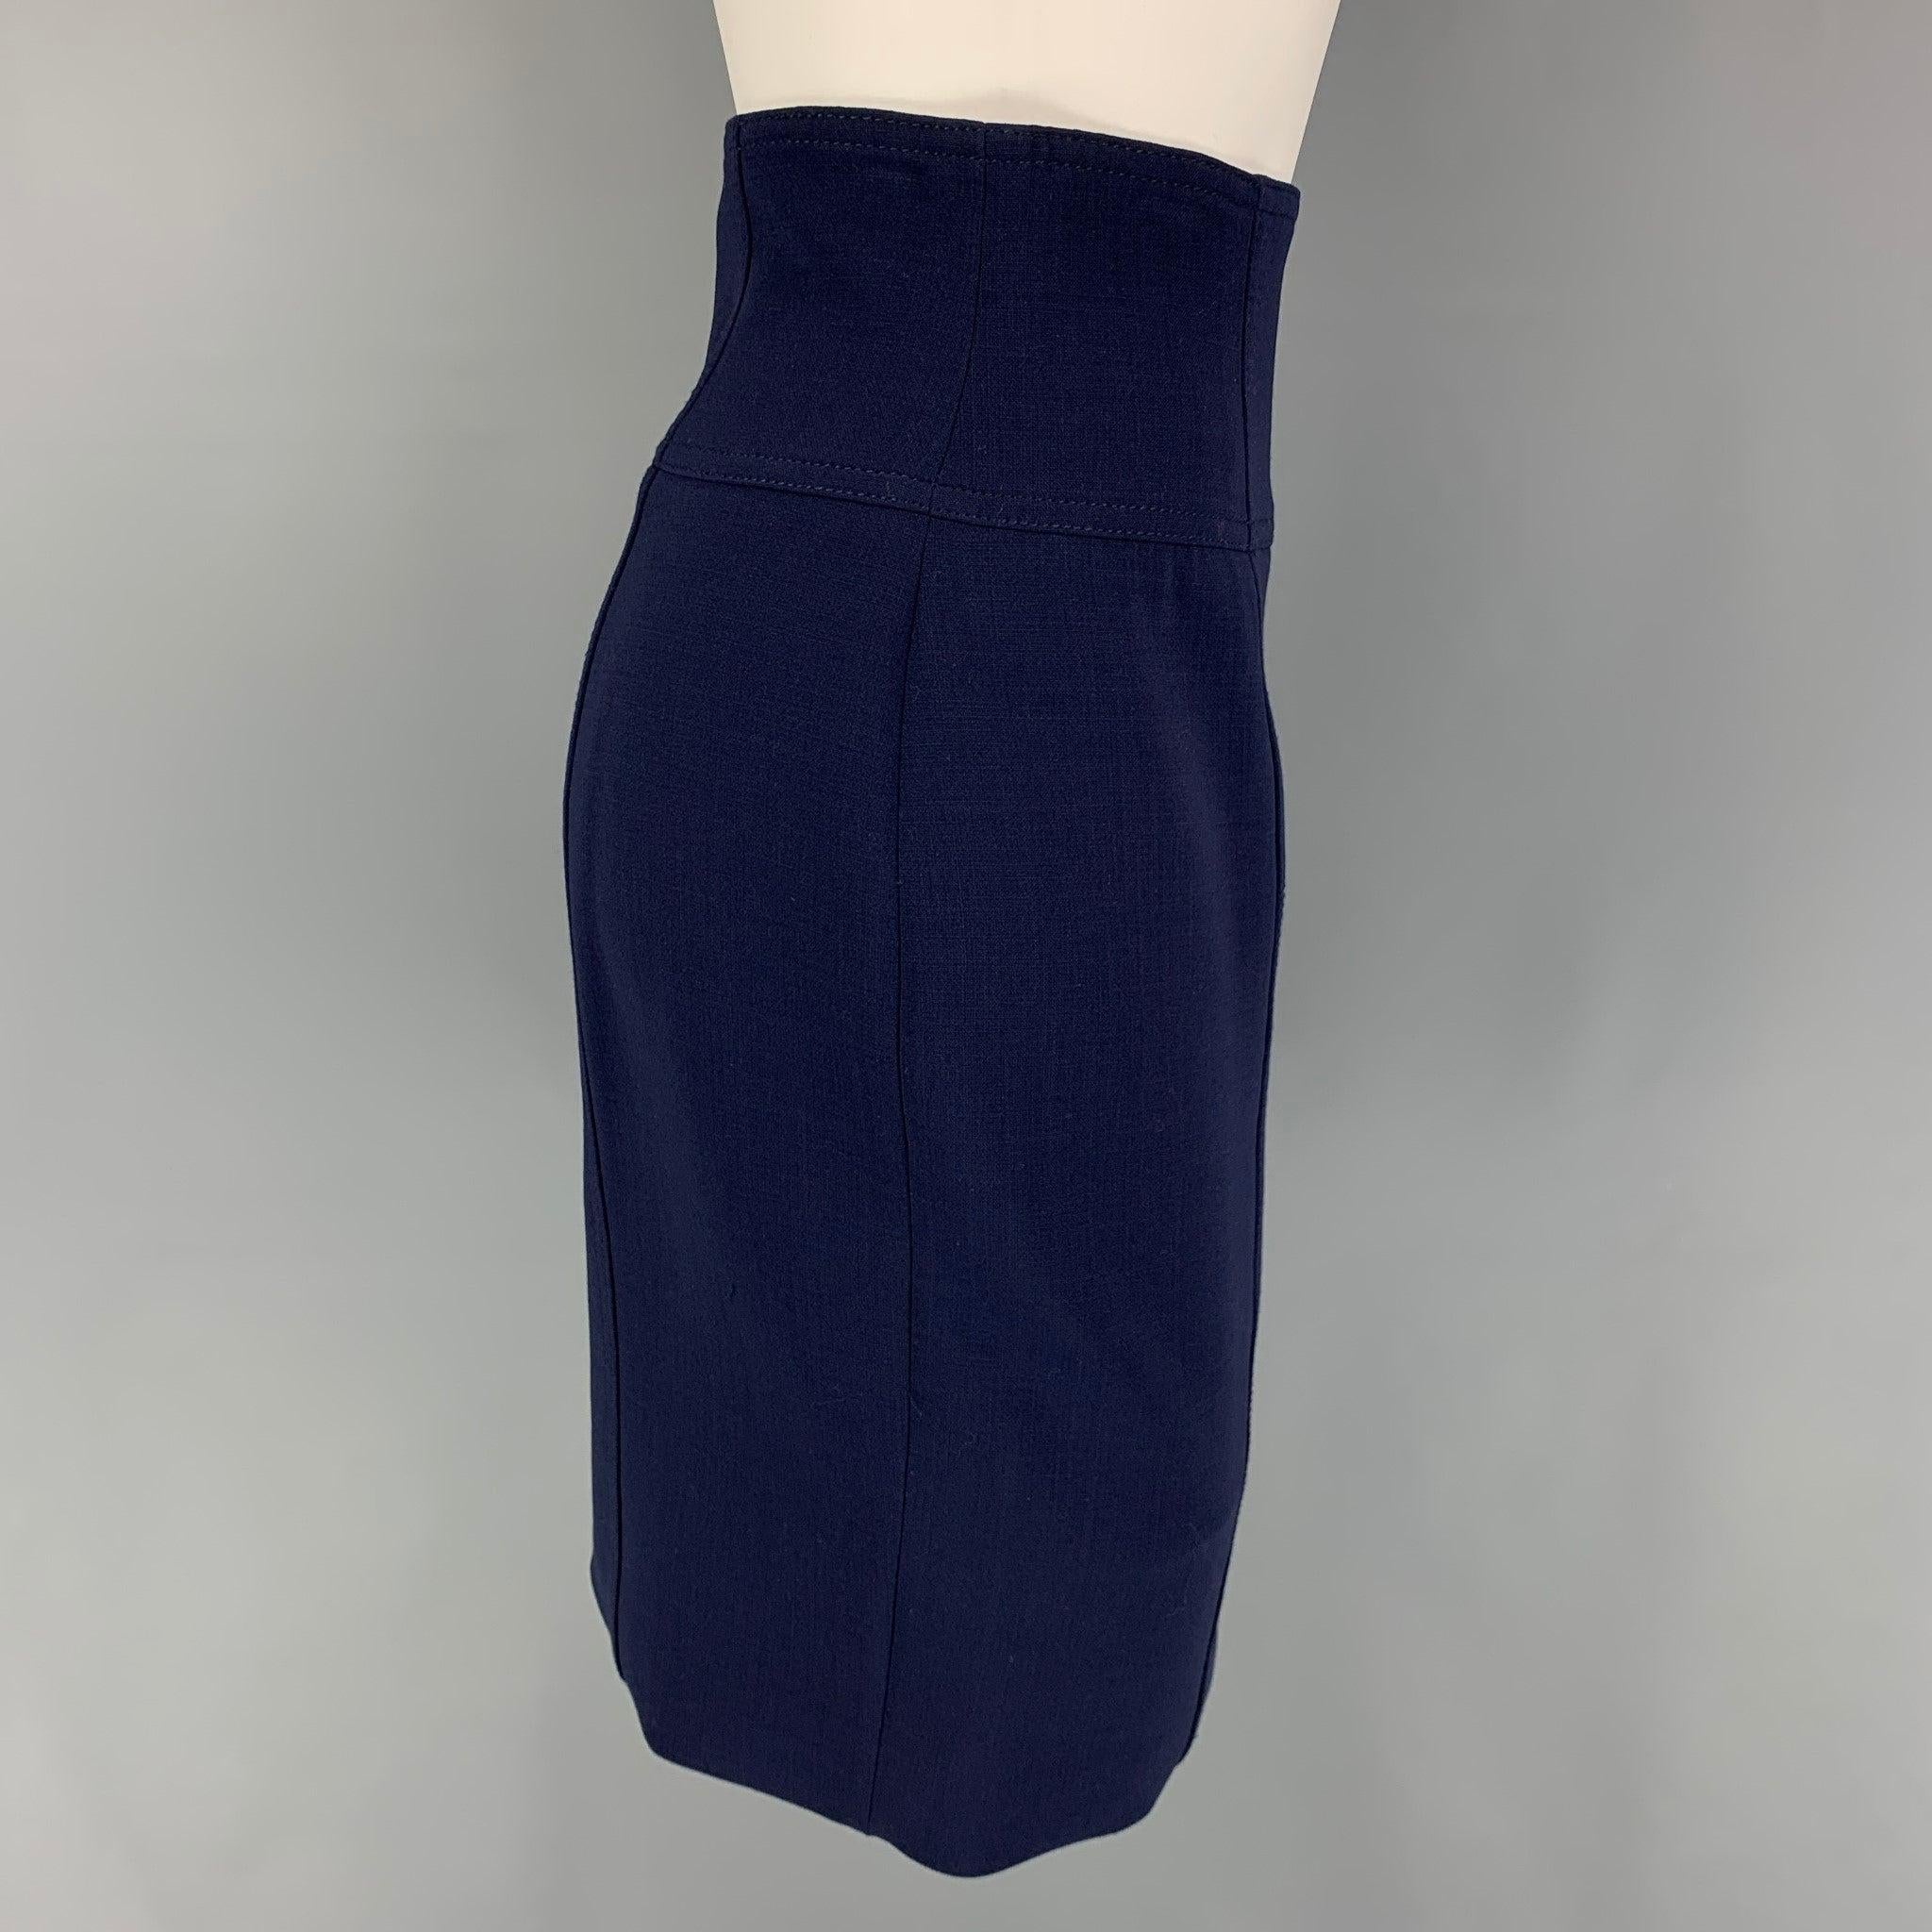 RALPH LAUREN 'Black Label' skirt comes in a navy wool featuring a pencil style and a side zipper closure. Very Good
Pre-Owned Condition. 

Marked:   4 

Measurements: 
  Waist: 26 inches  Hip: 34 inches  Length: 20.5 inches 
  
  
 
Reference: